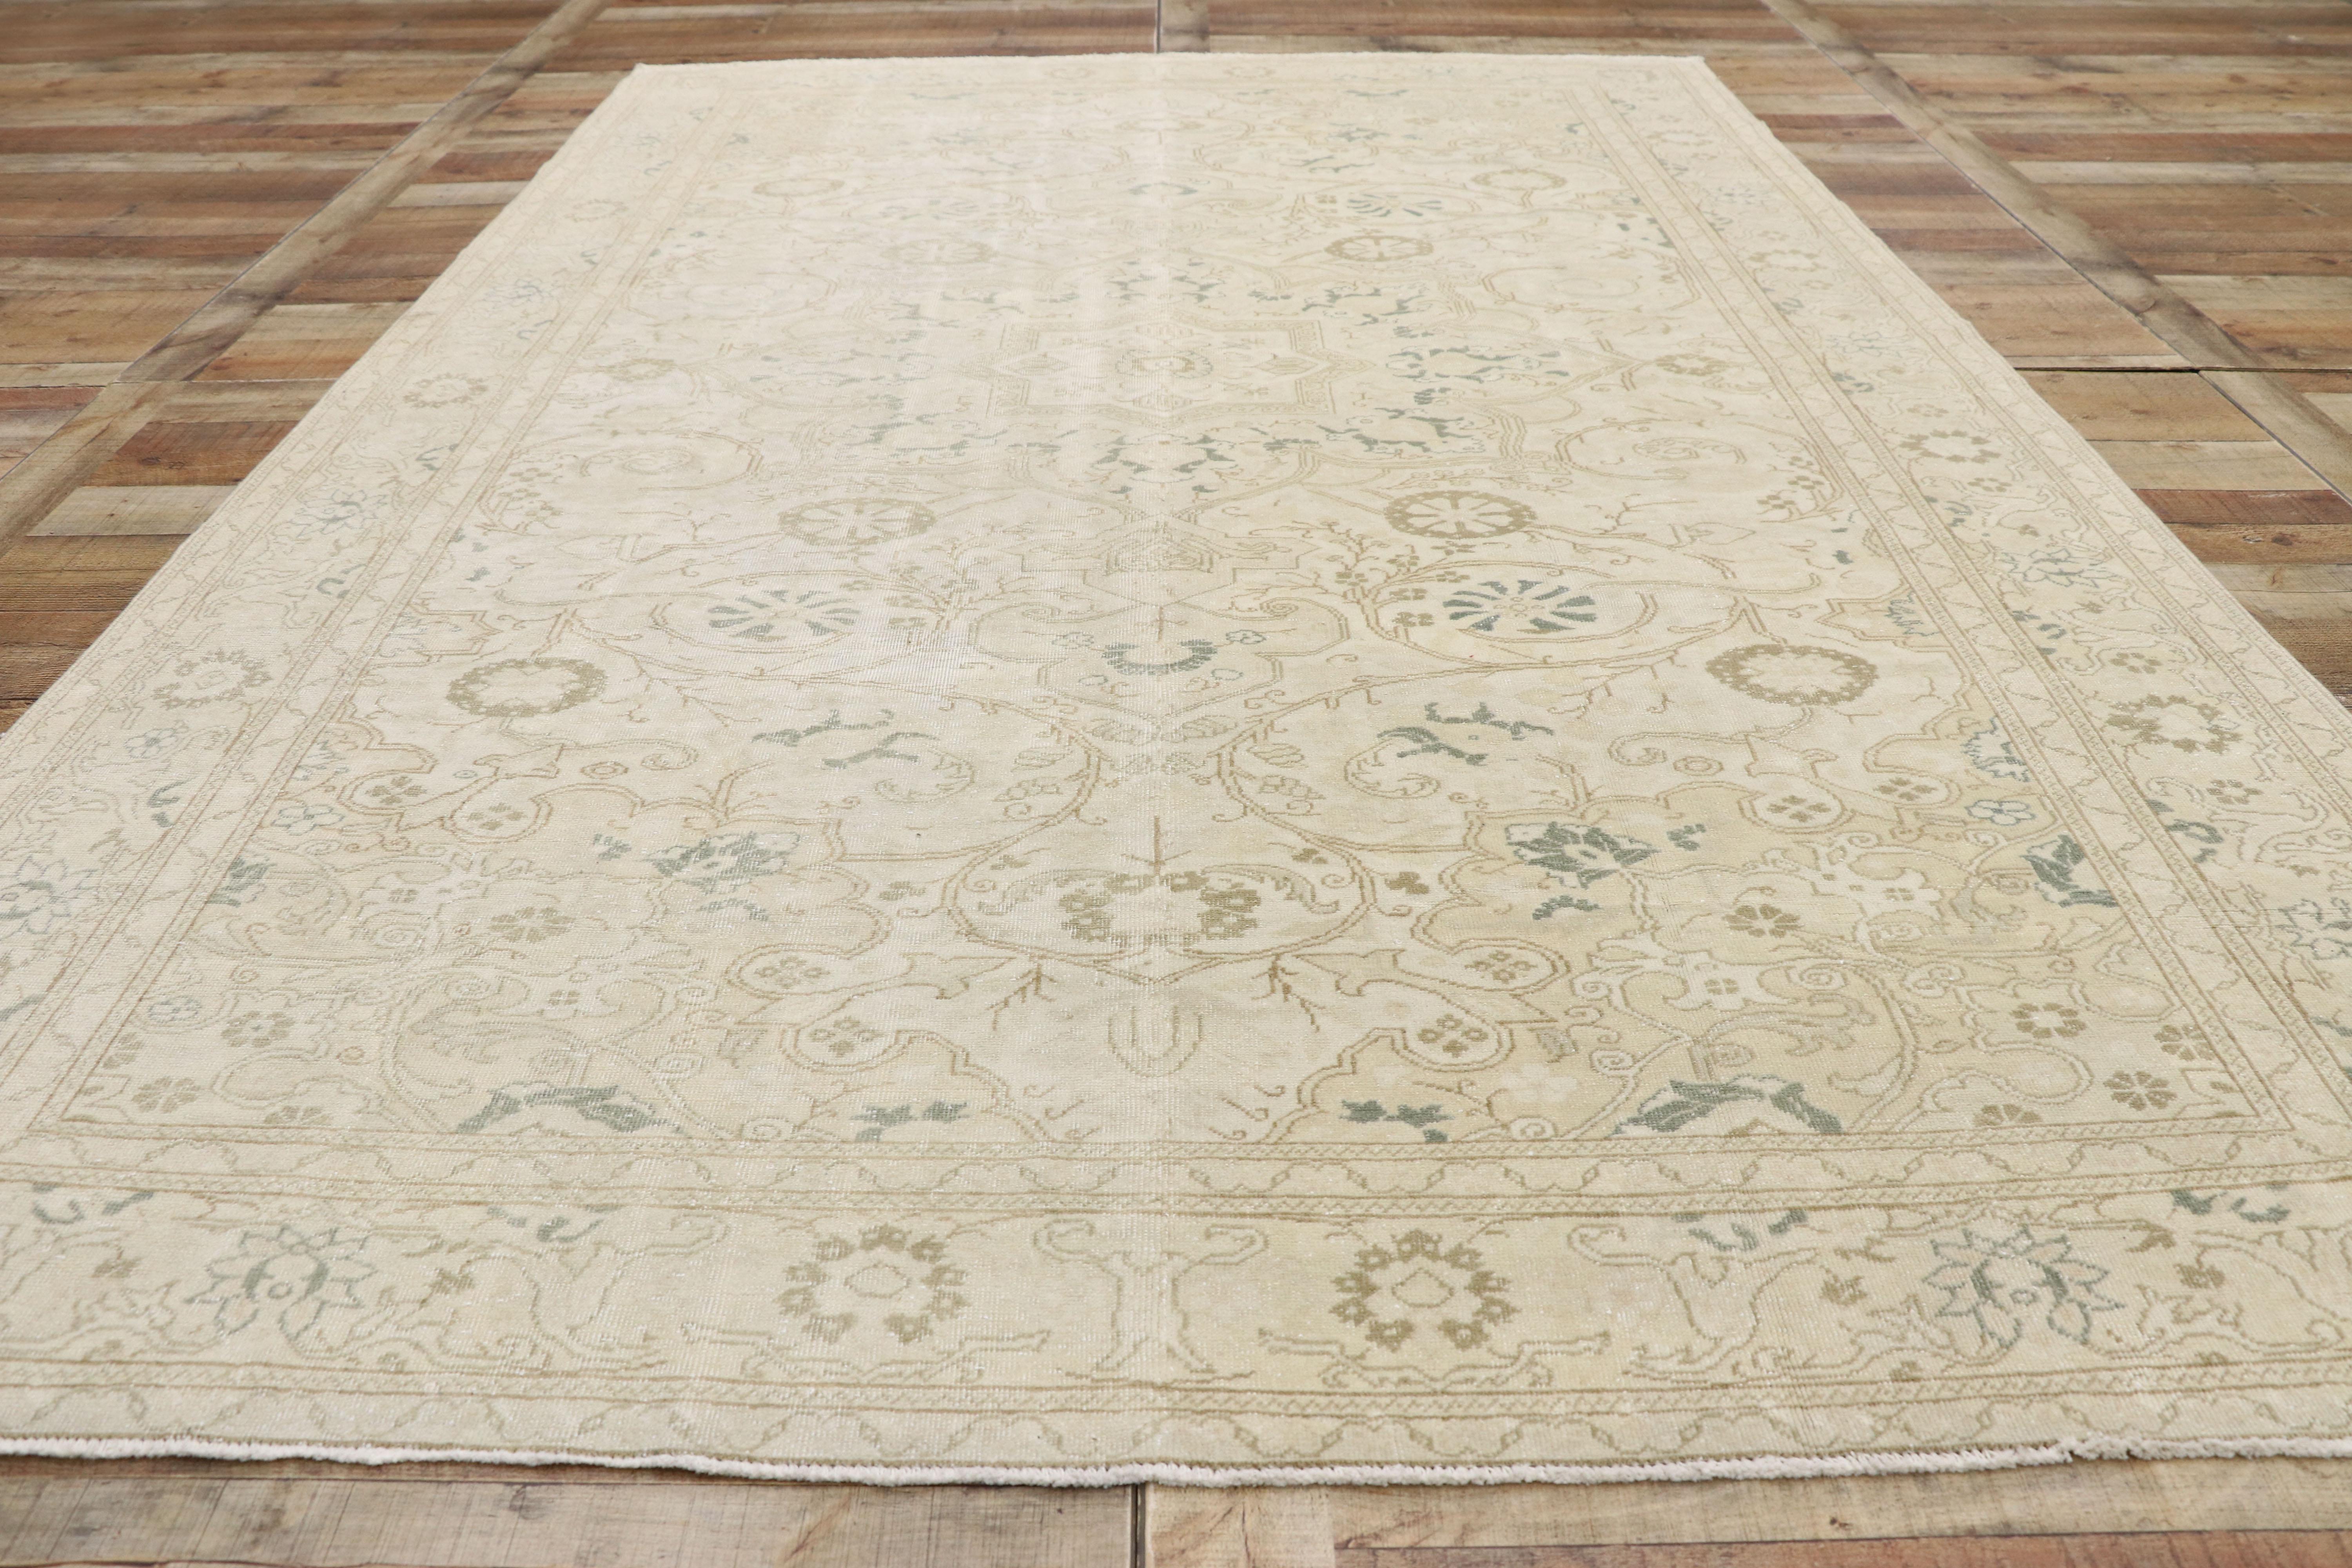 Wool Distressed Vintage Turkish Sivas Rug with Modern Rustic Cotswold Cottage Style